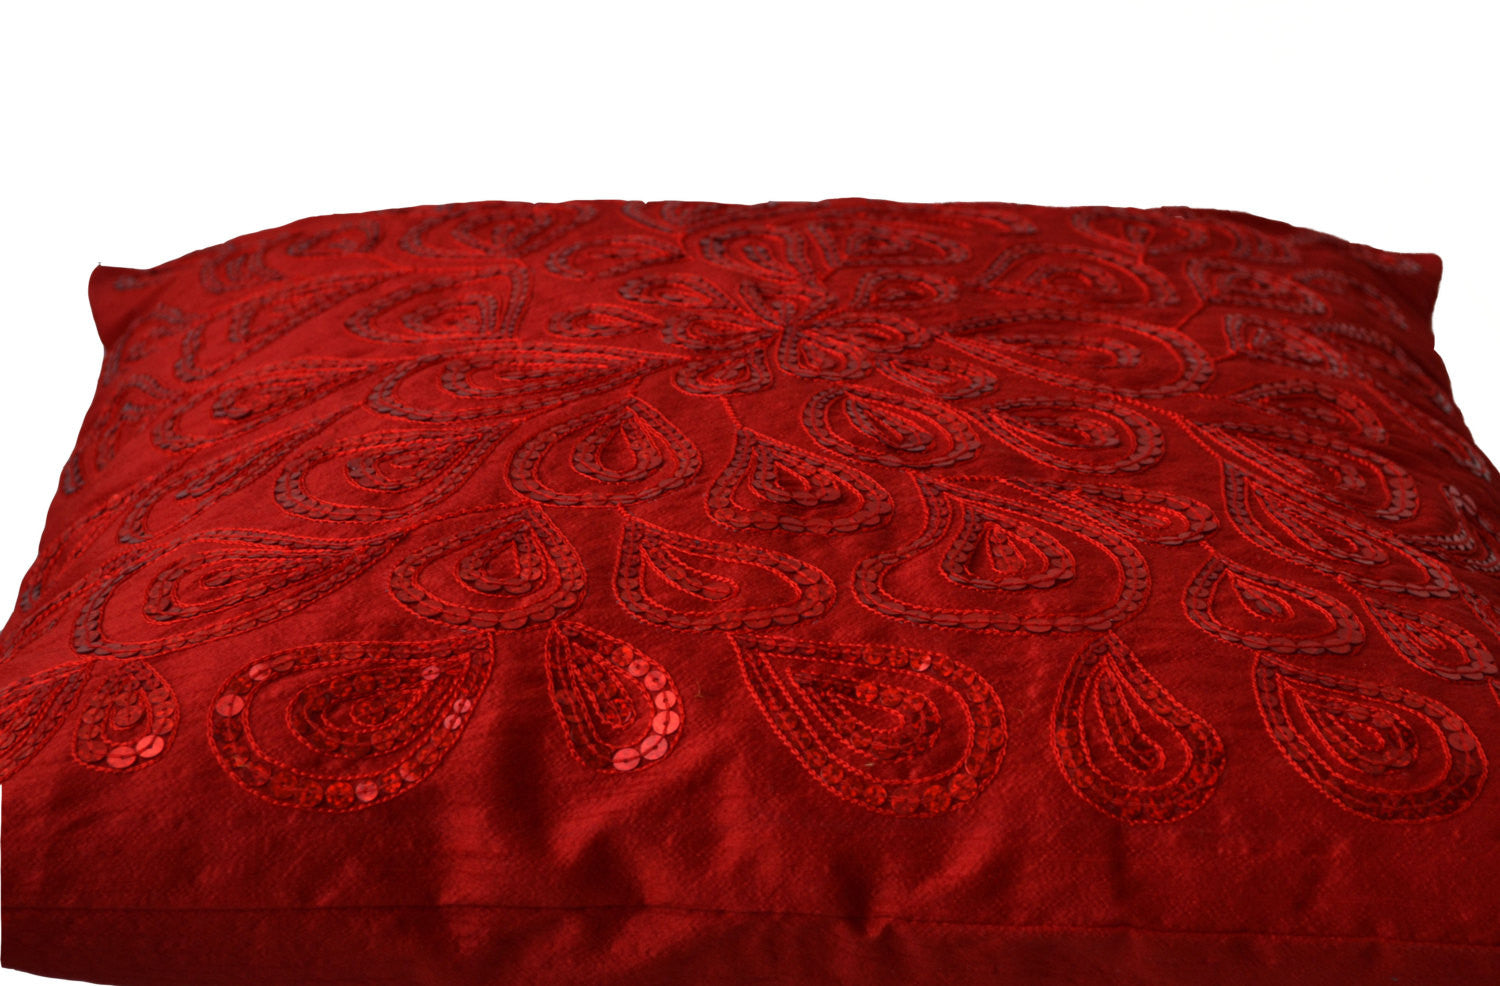 Handmade silk throw pillow cover with red sequin